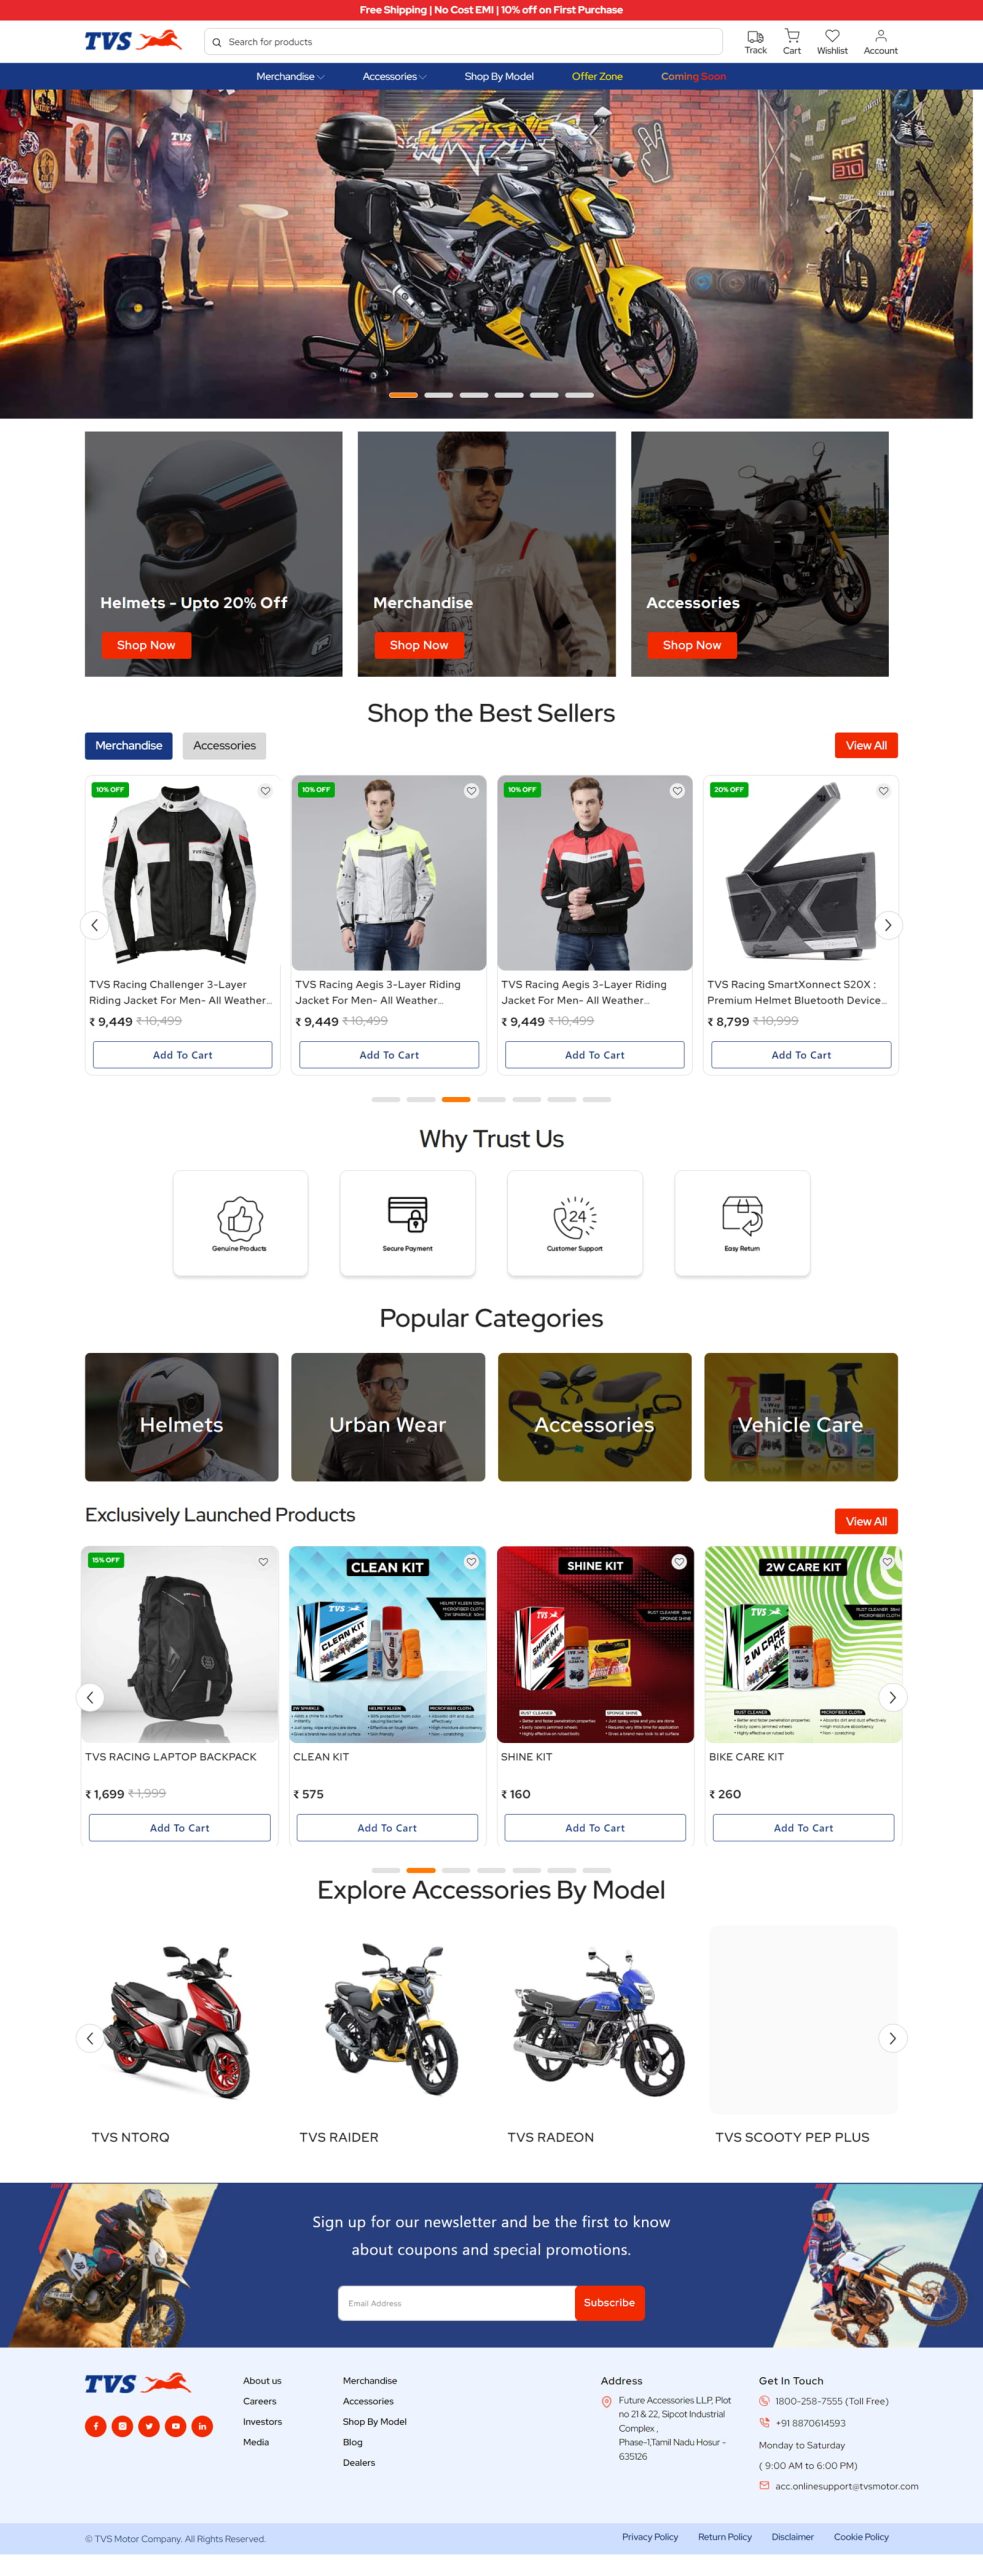 Shopify E-commerce Solution for Selling TVS Merchandise and Accessories